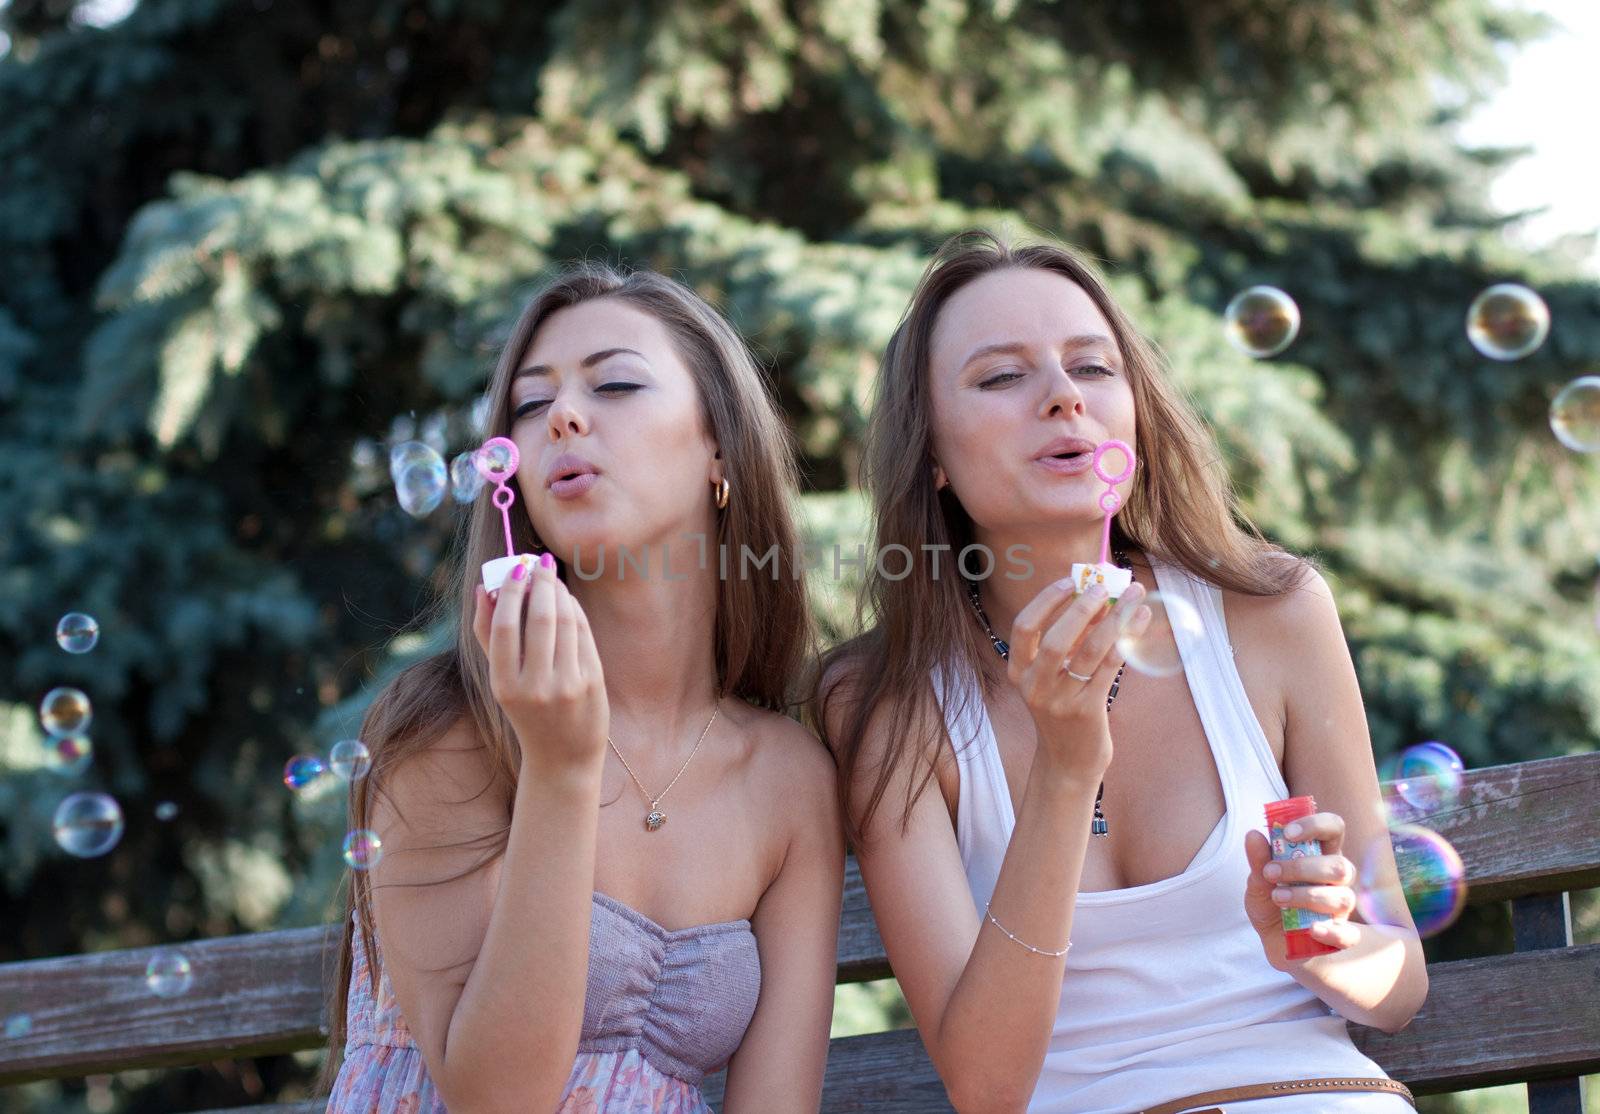 Two beautiful young women make soap bubbles sitting on a bench in park